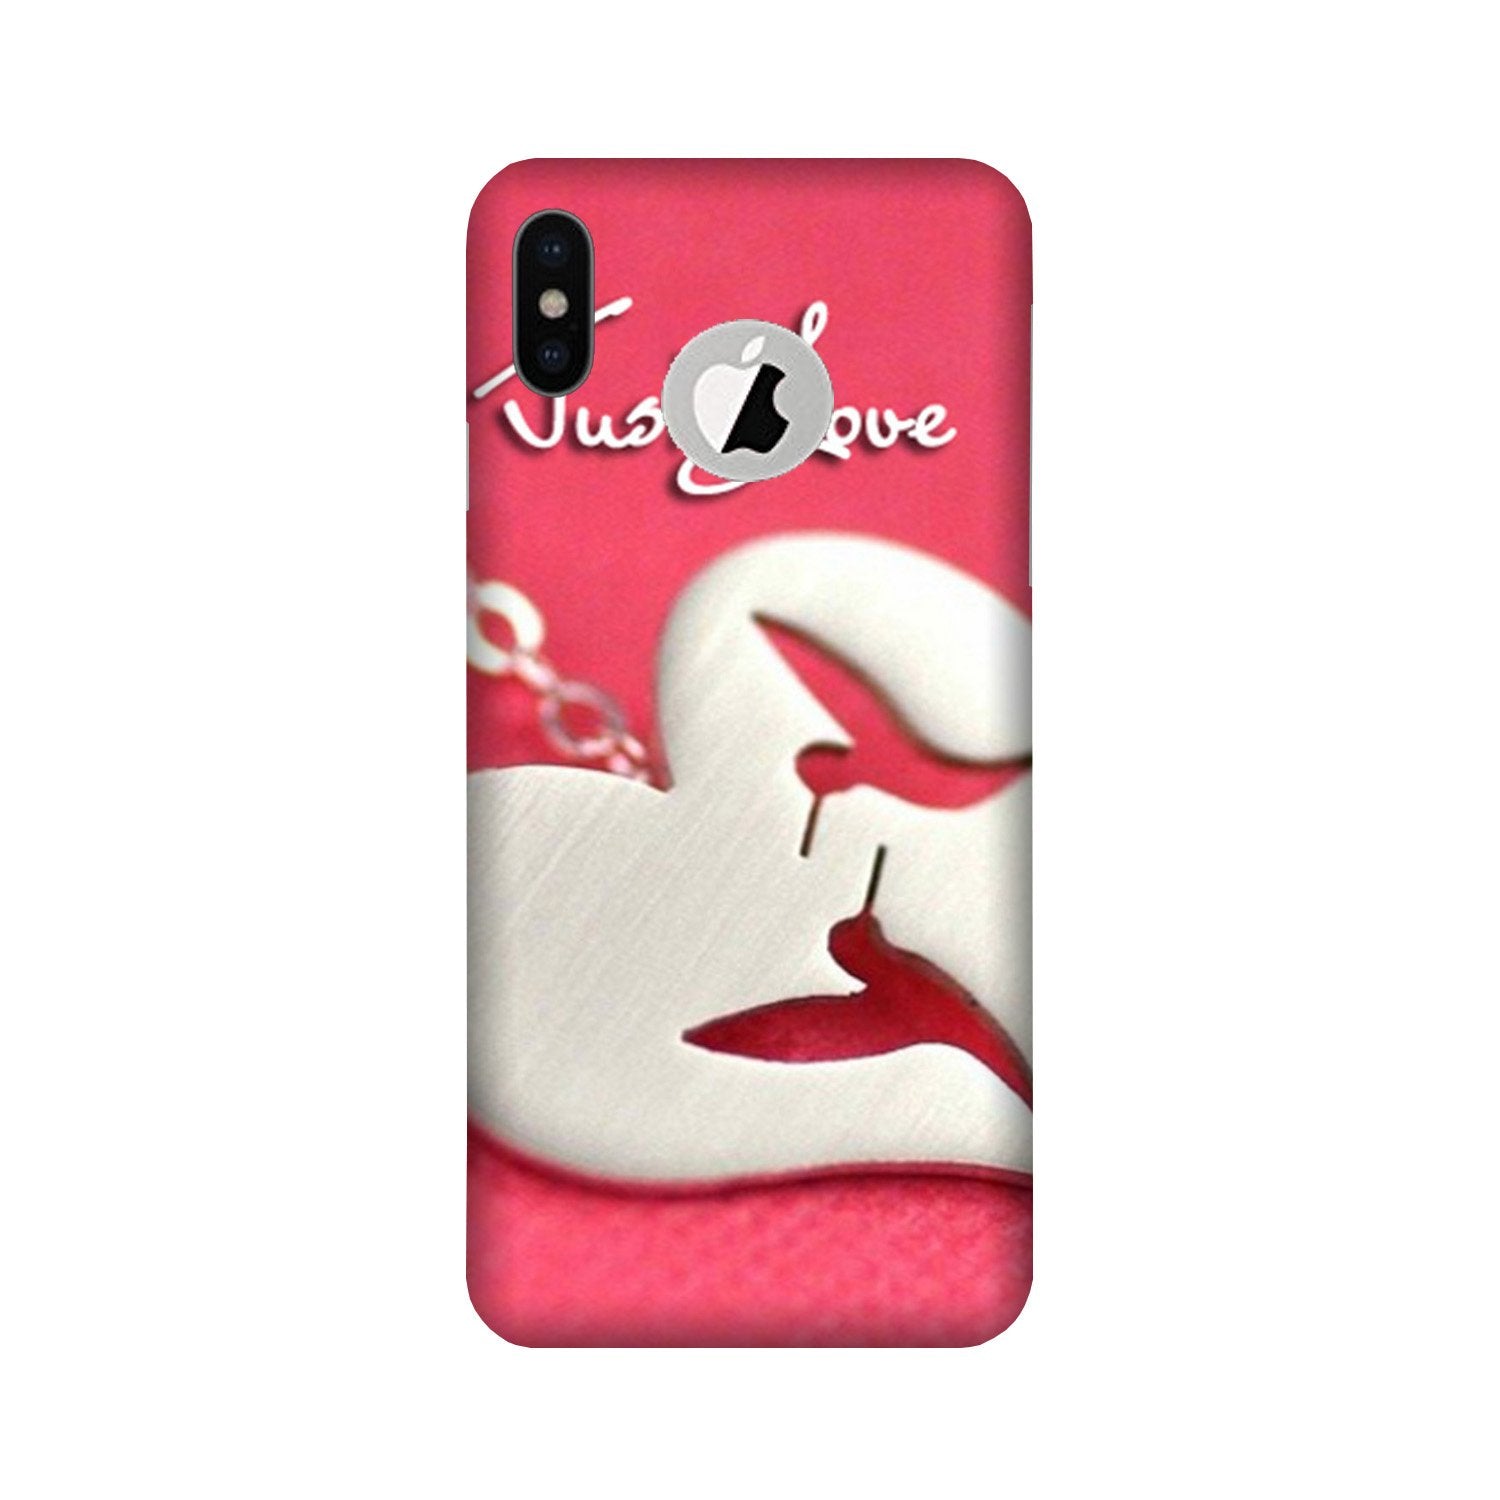 Just love Case for iPhone X logo cut